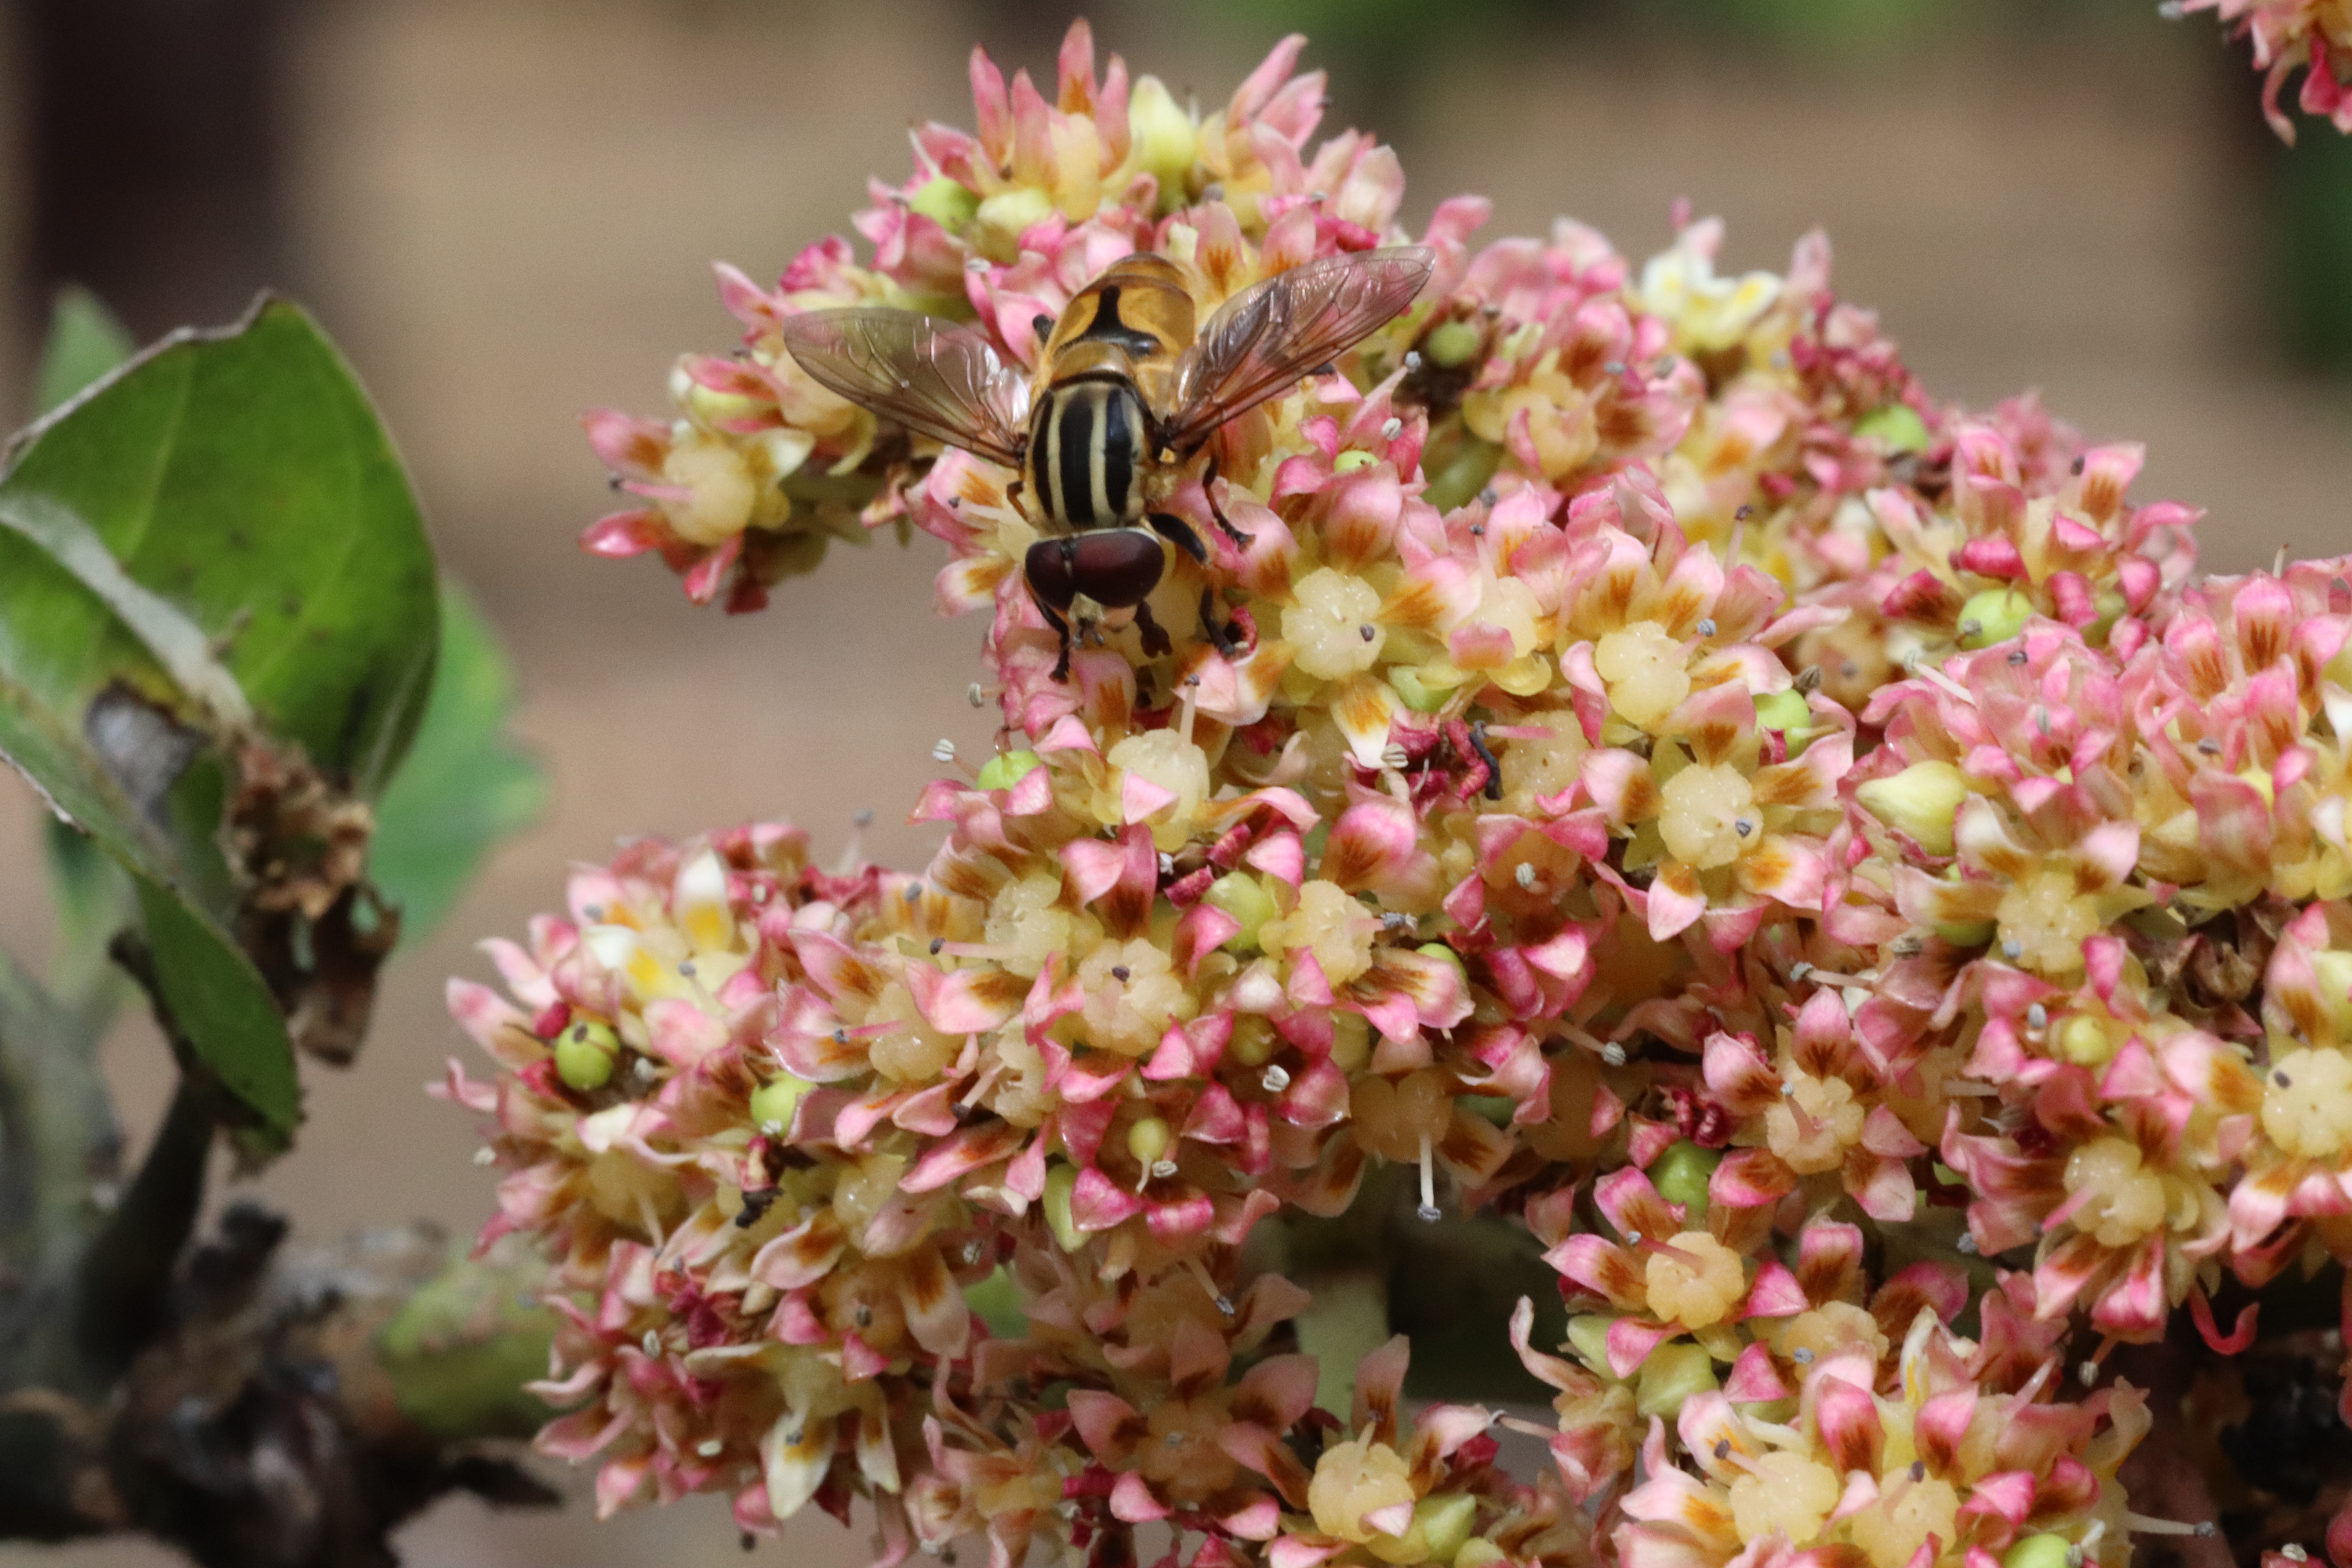 The hover fly Mesembrius bengalensis (Syrphidae) feeding on mango flowers in the Darwin region. 